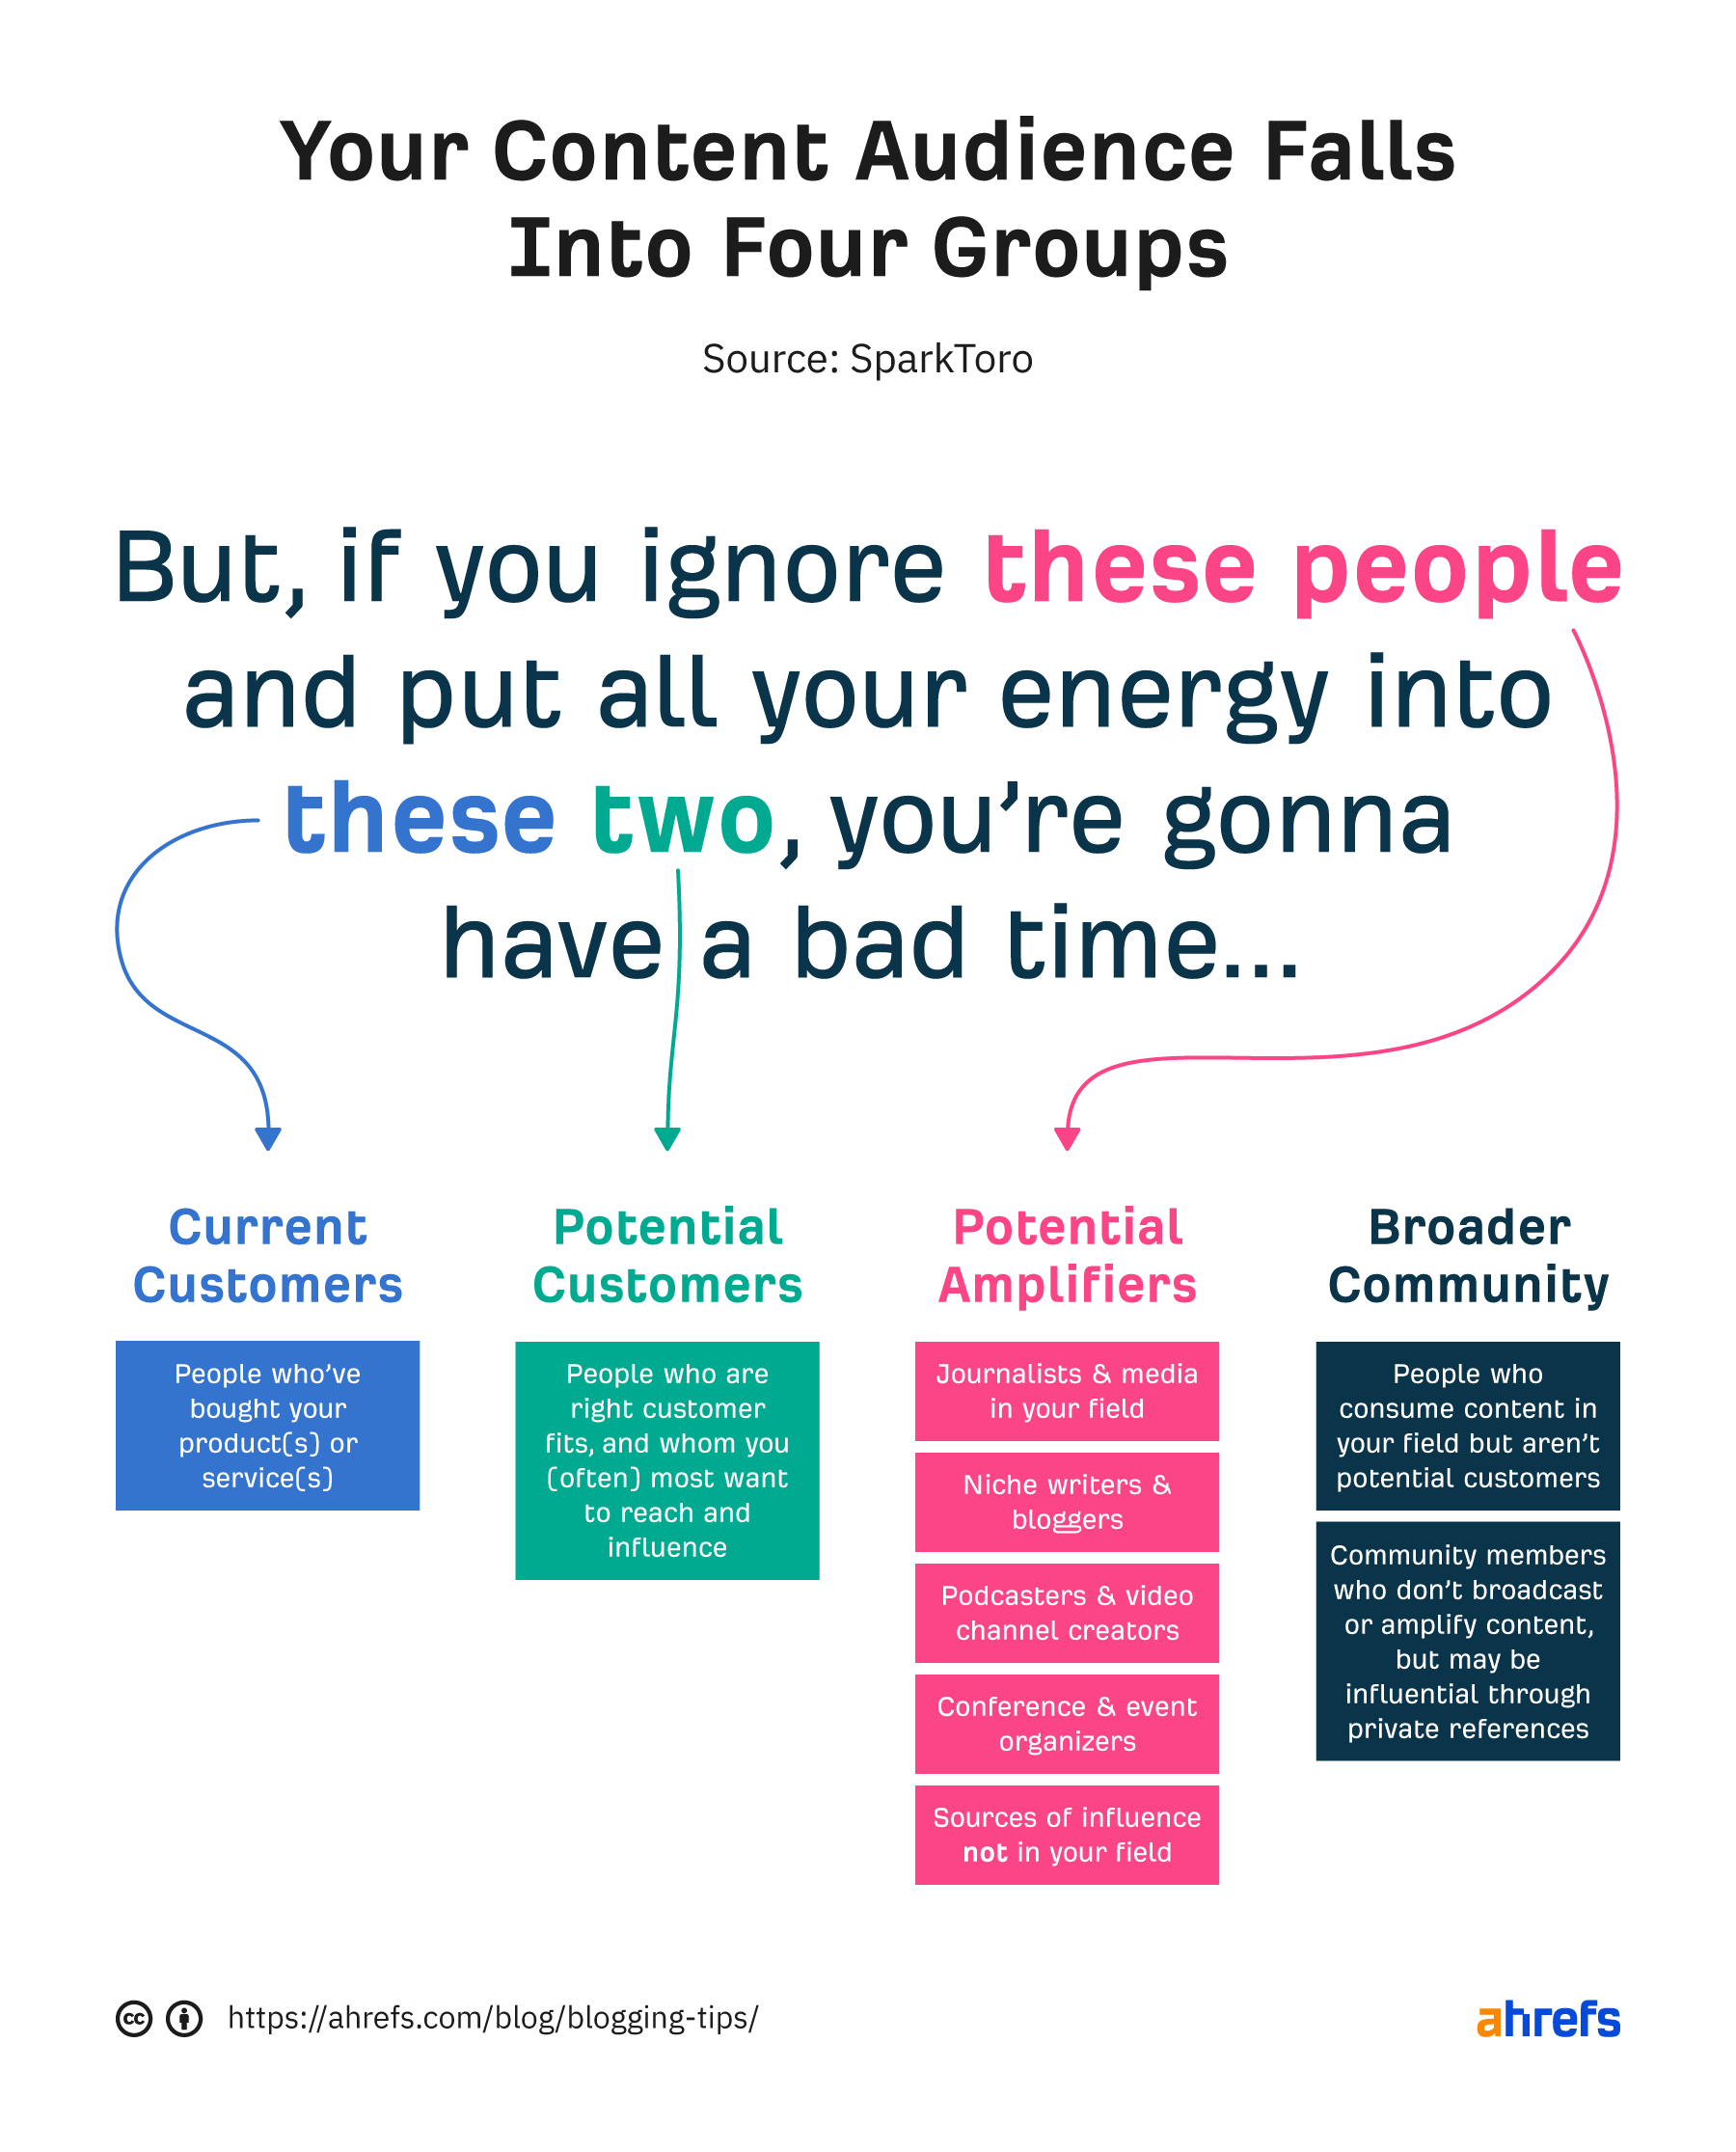 The four content audience groups